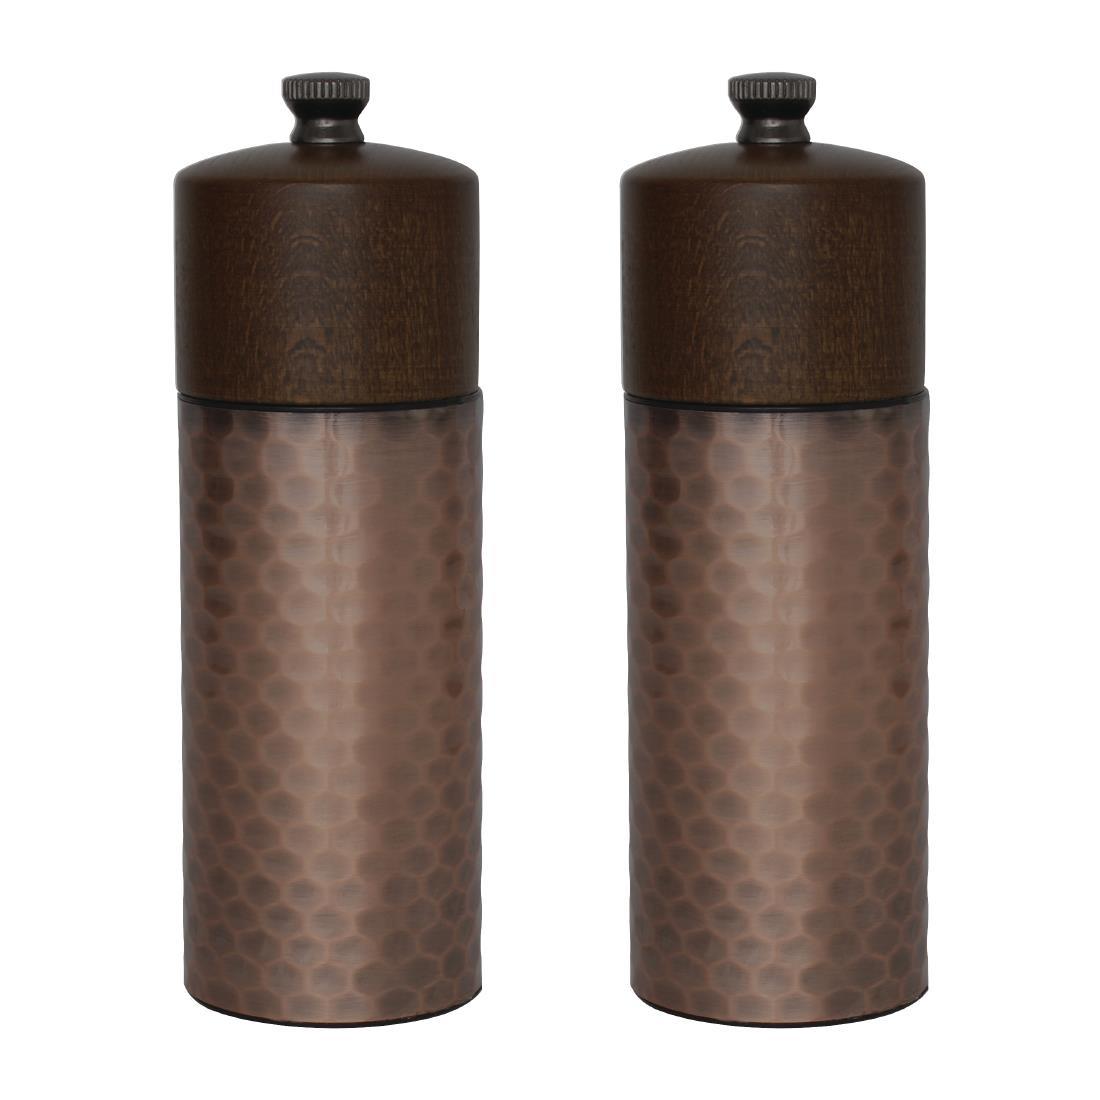 Olympia Copper Wood Salt and Pepper Mill Set (Pack of 2) - CR689  - 1